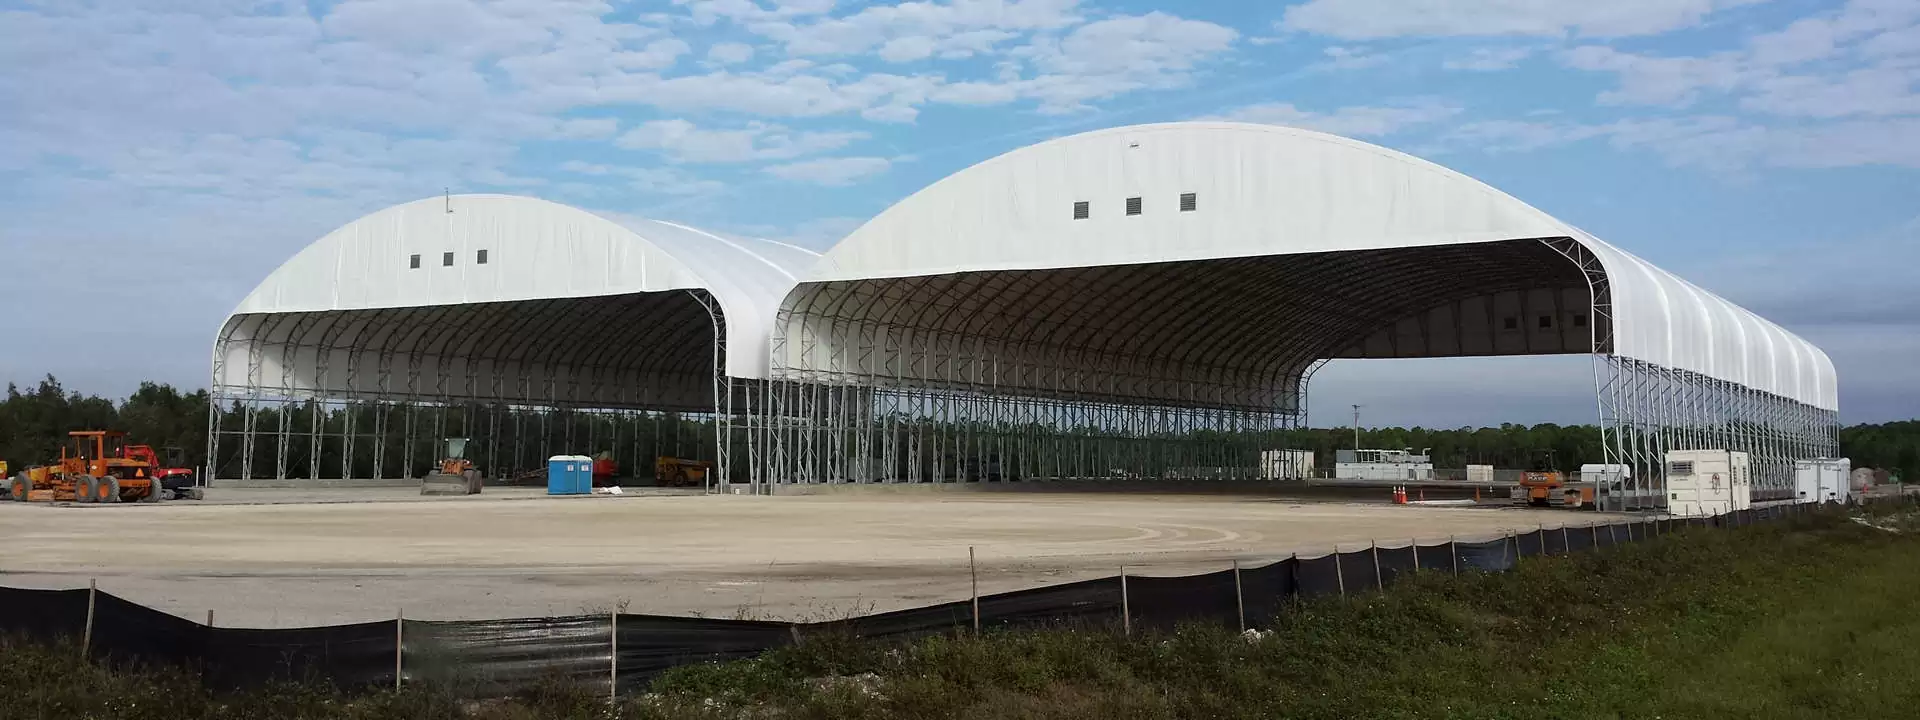 Why Construction Companies Use Fabric Structures